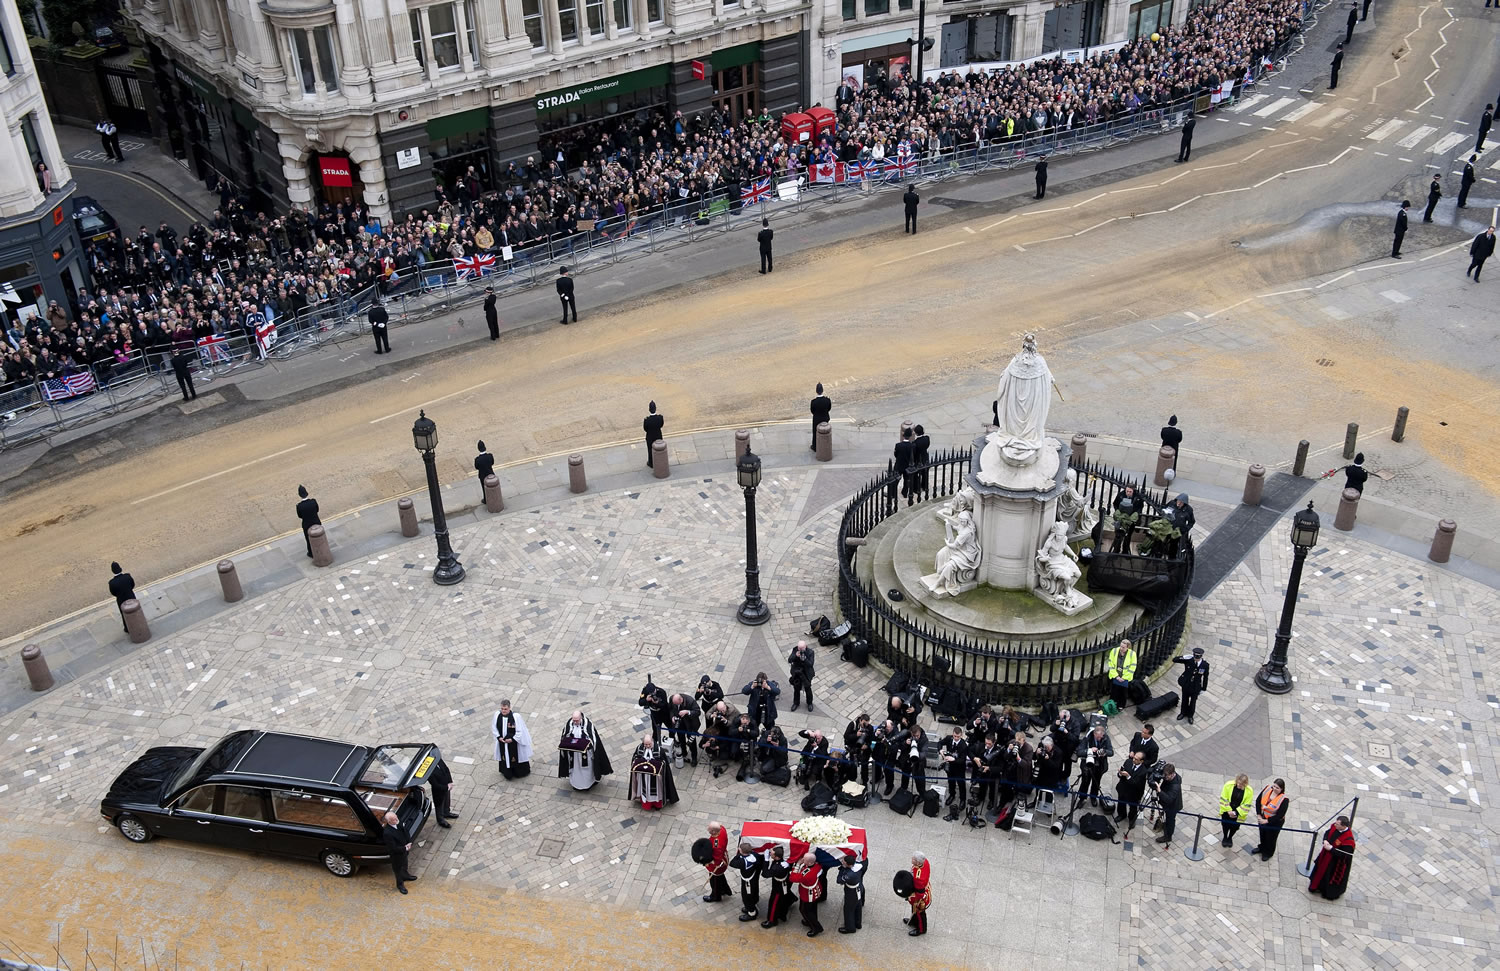 The Union flag-draped coffin holding the body of British former Prime Minister Margaret Thatcher is carried from St. Paul's Cathedral in London, after the funeral service, Wednesday.